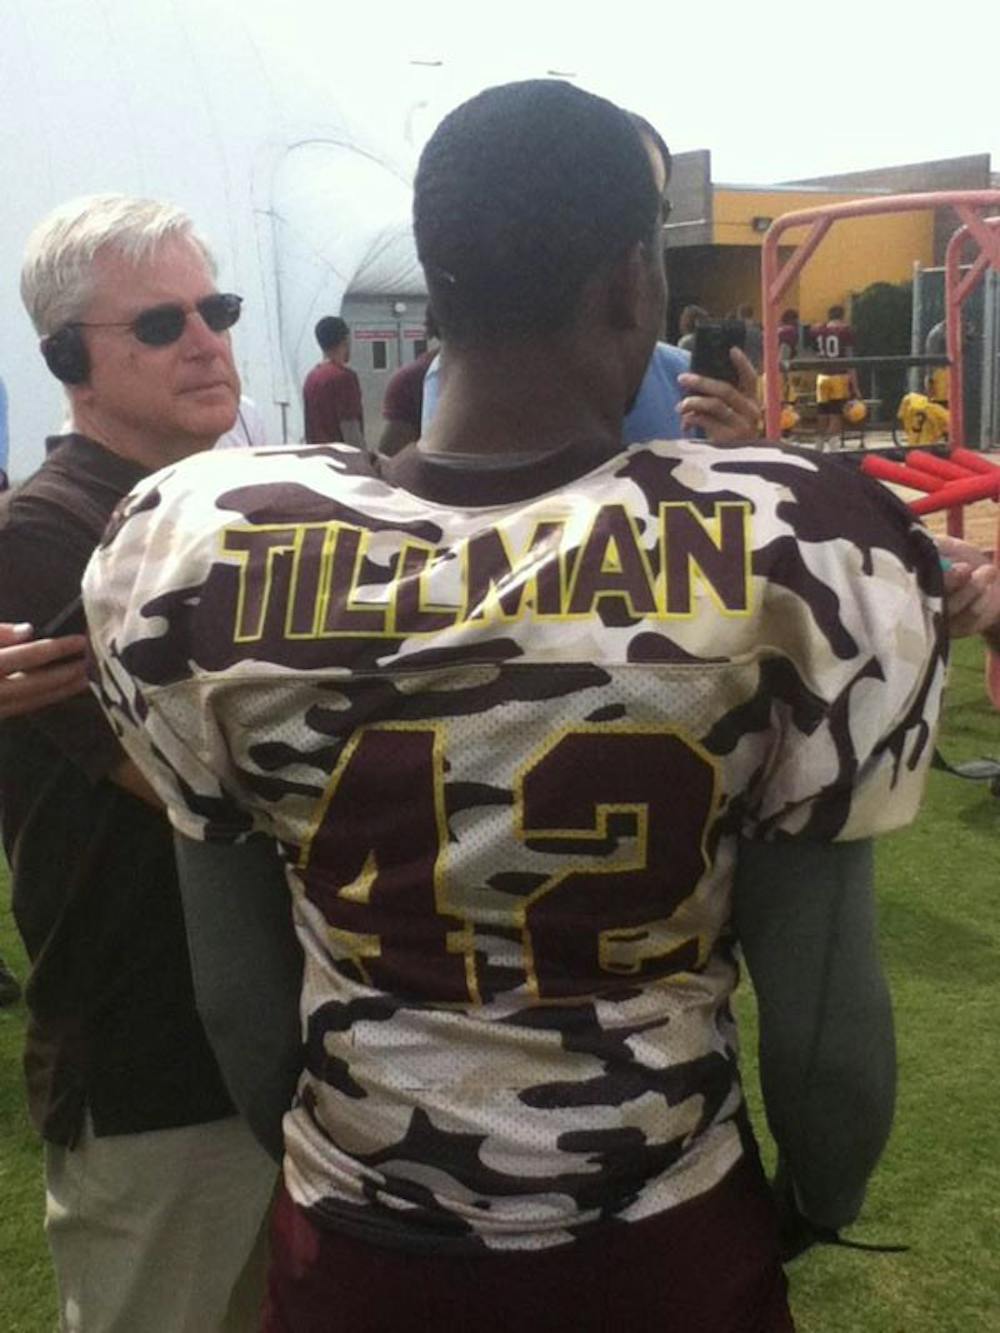 Junior safety Alden Darby speaks to reporters on Tuesday in his Pat Tillman camouflage jersey, an honor awarded by football coach Todd Graham. (Photo by Master Tesfatsion)